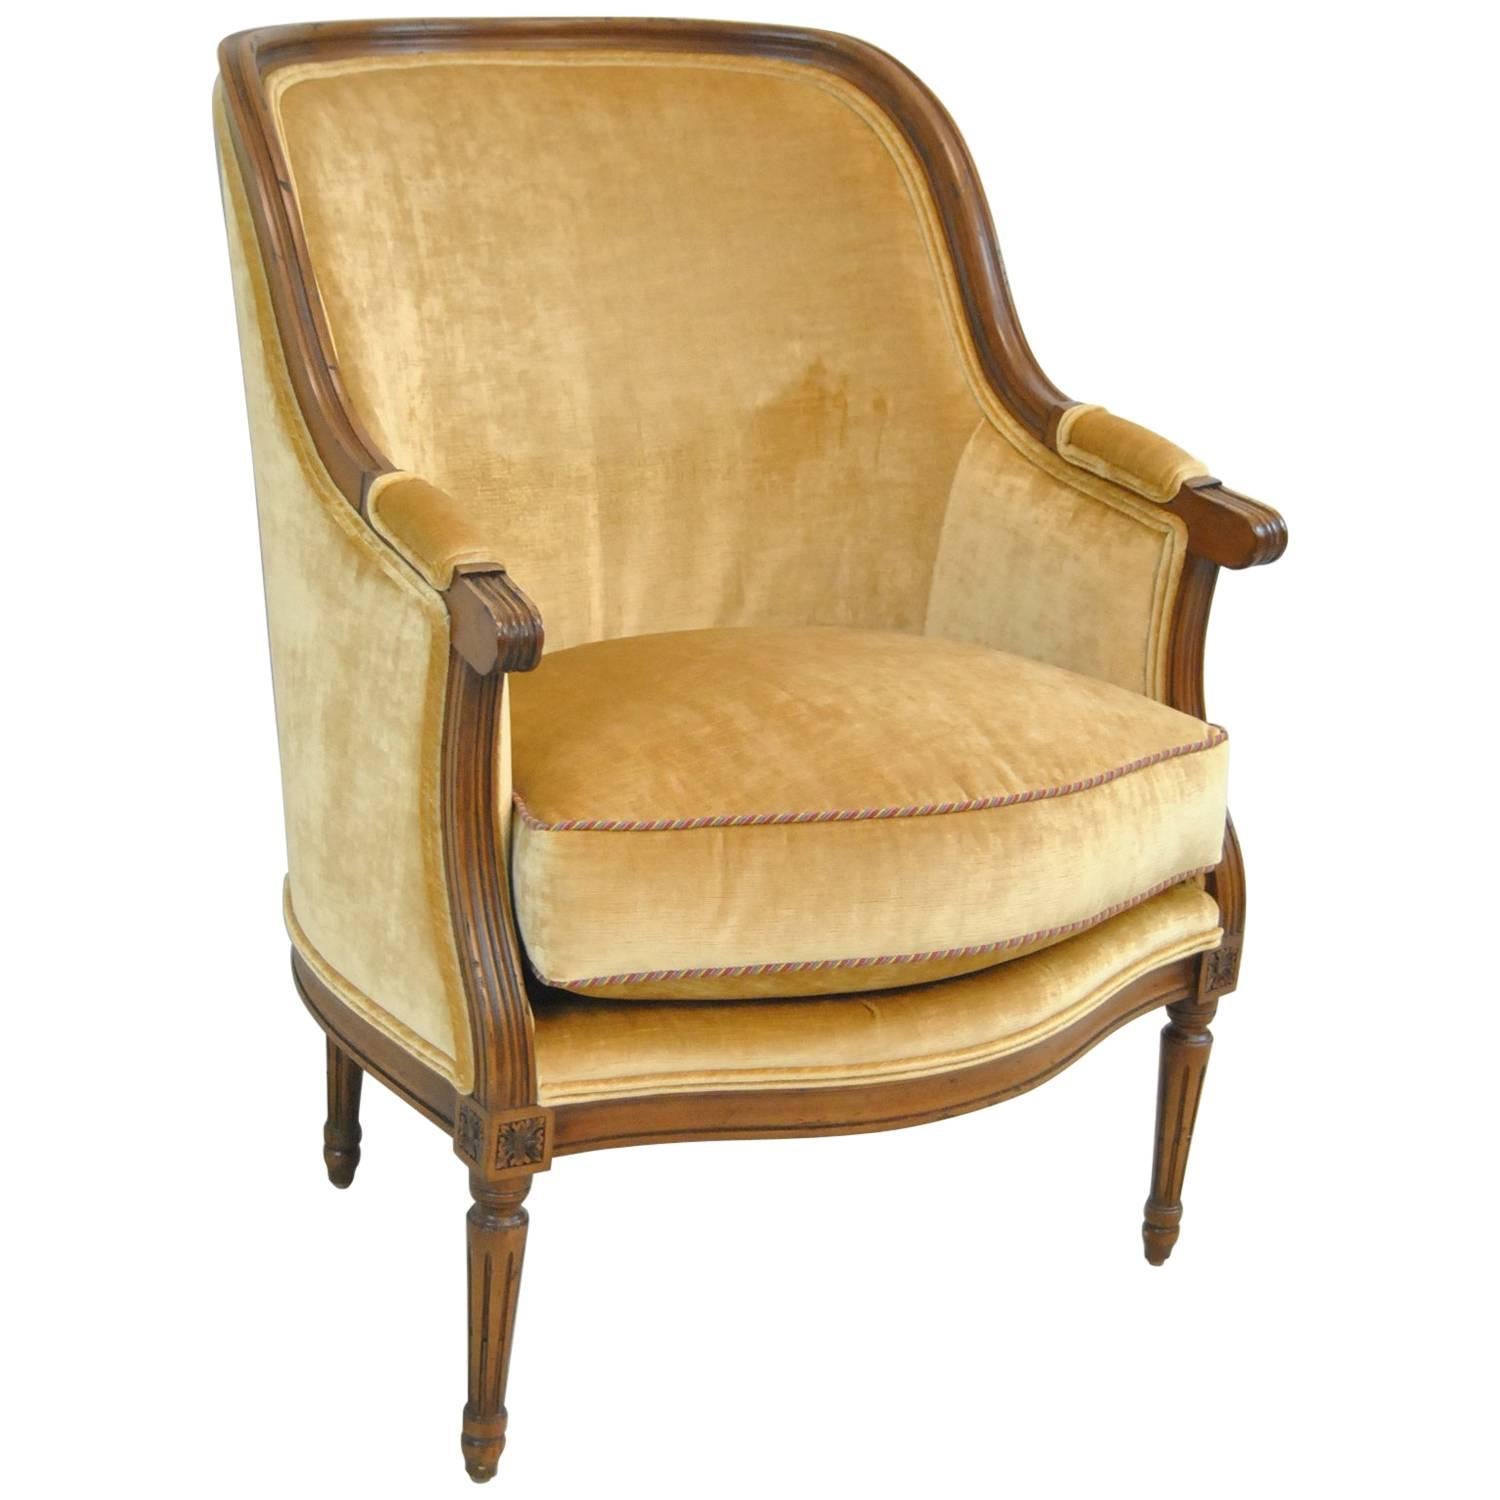 French Upholstered Bergere Chair by Isenhour Furniture